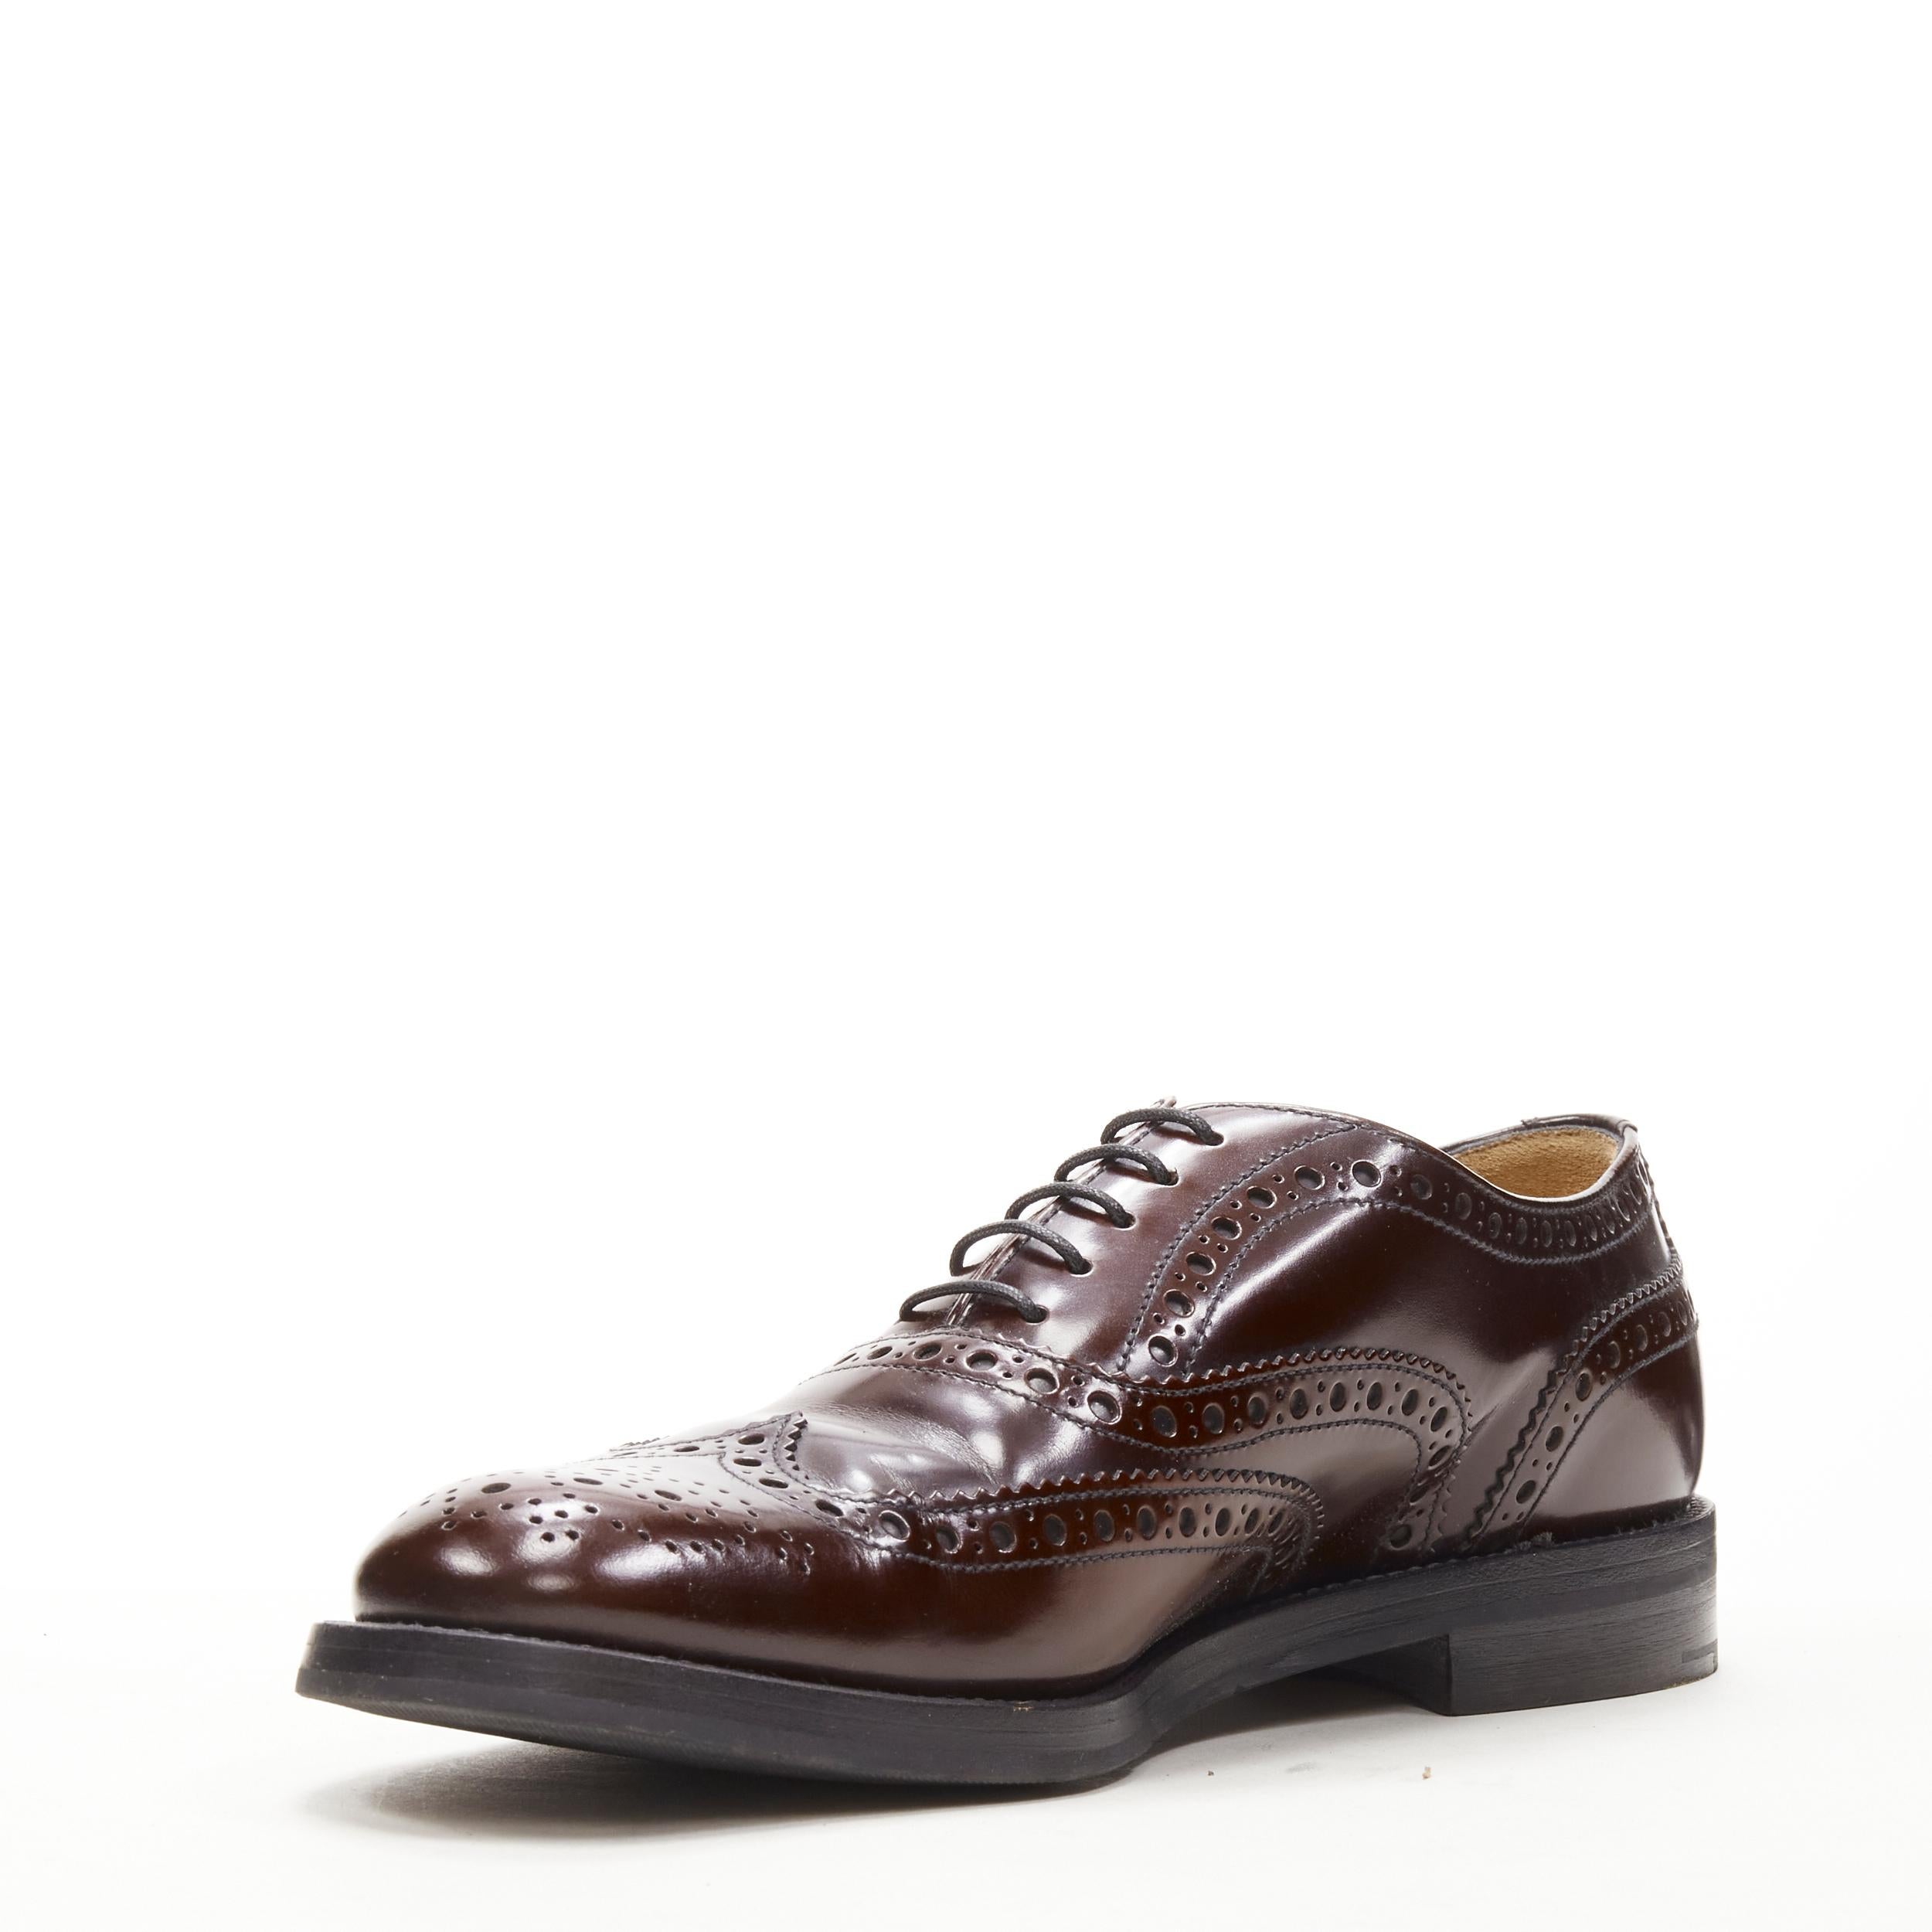 Red CHURCH'S Bess burgundy red perforated polished leather oxford loafer EU38 For Sale